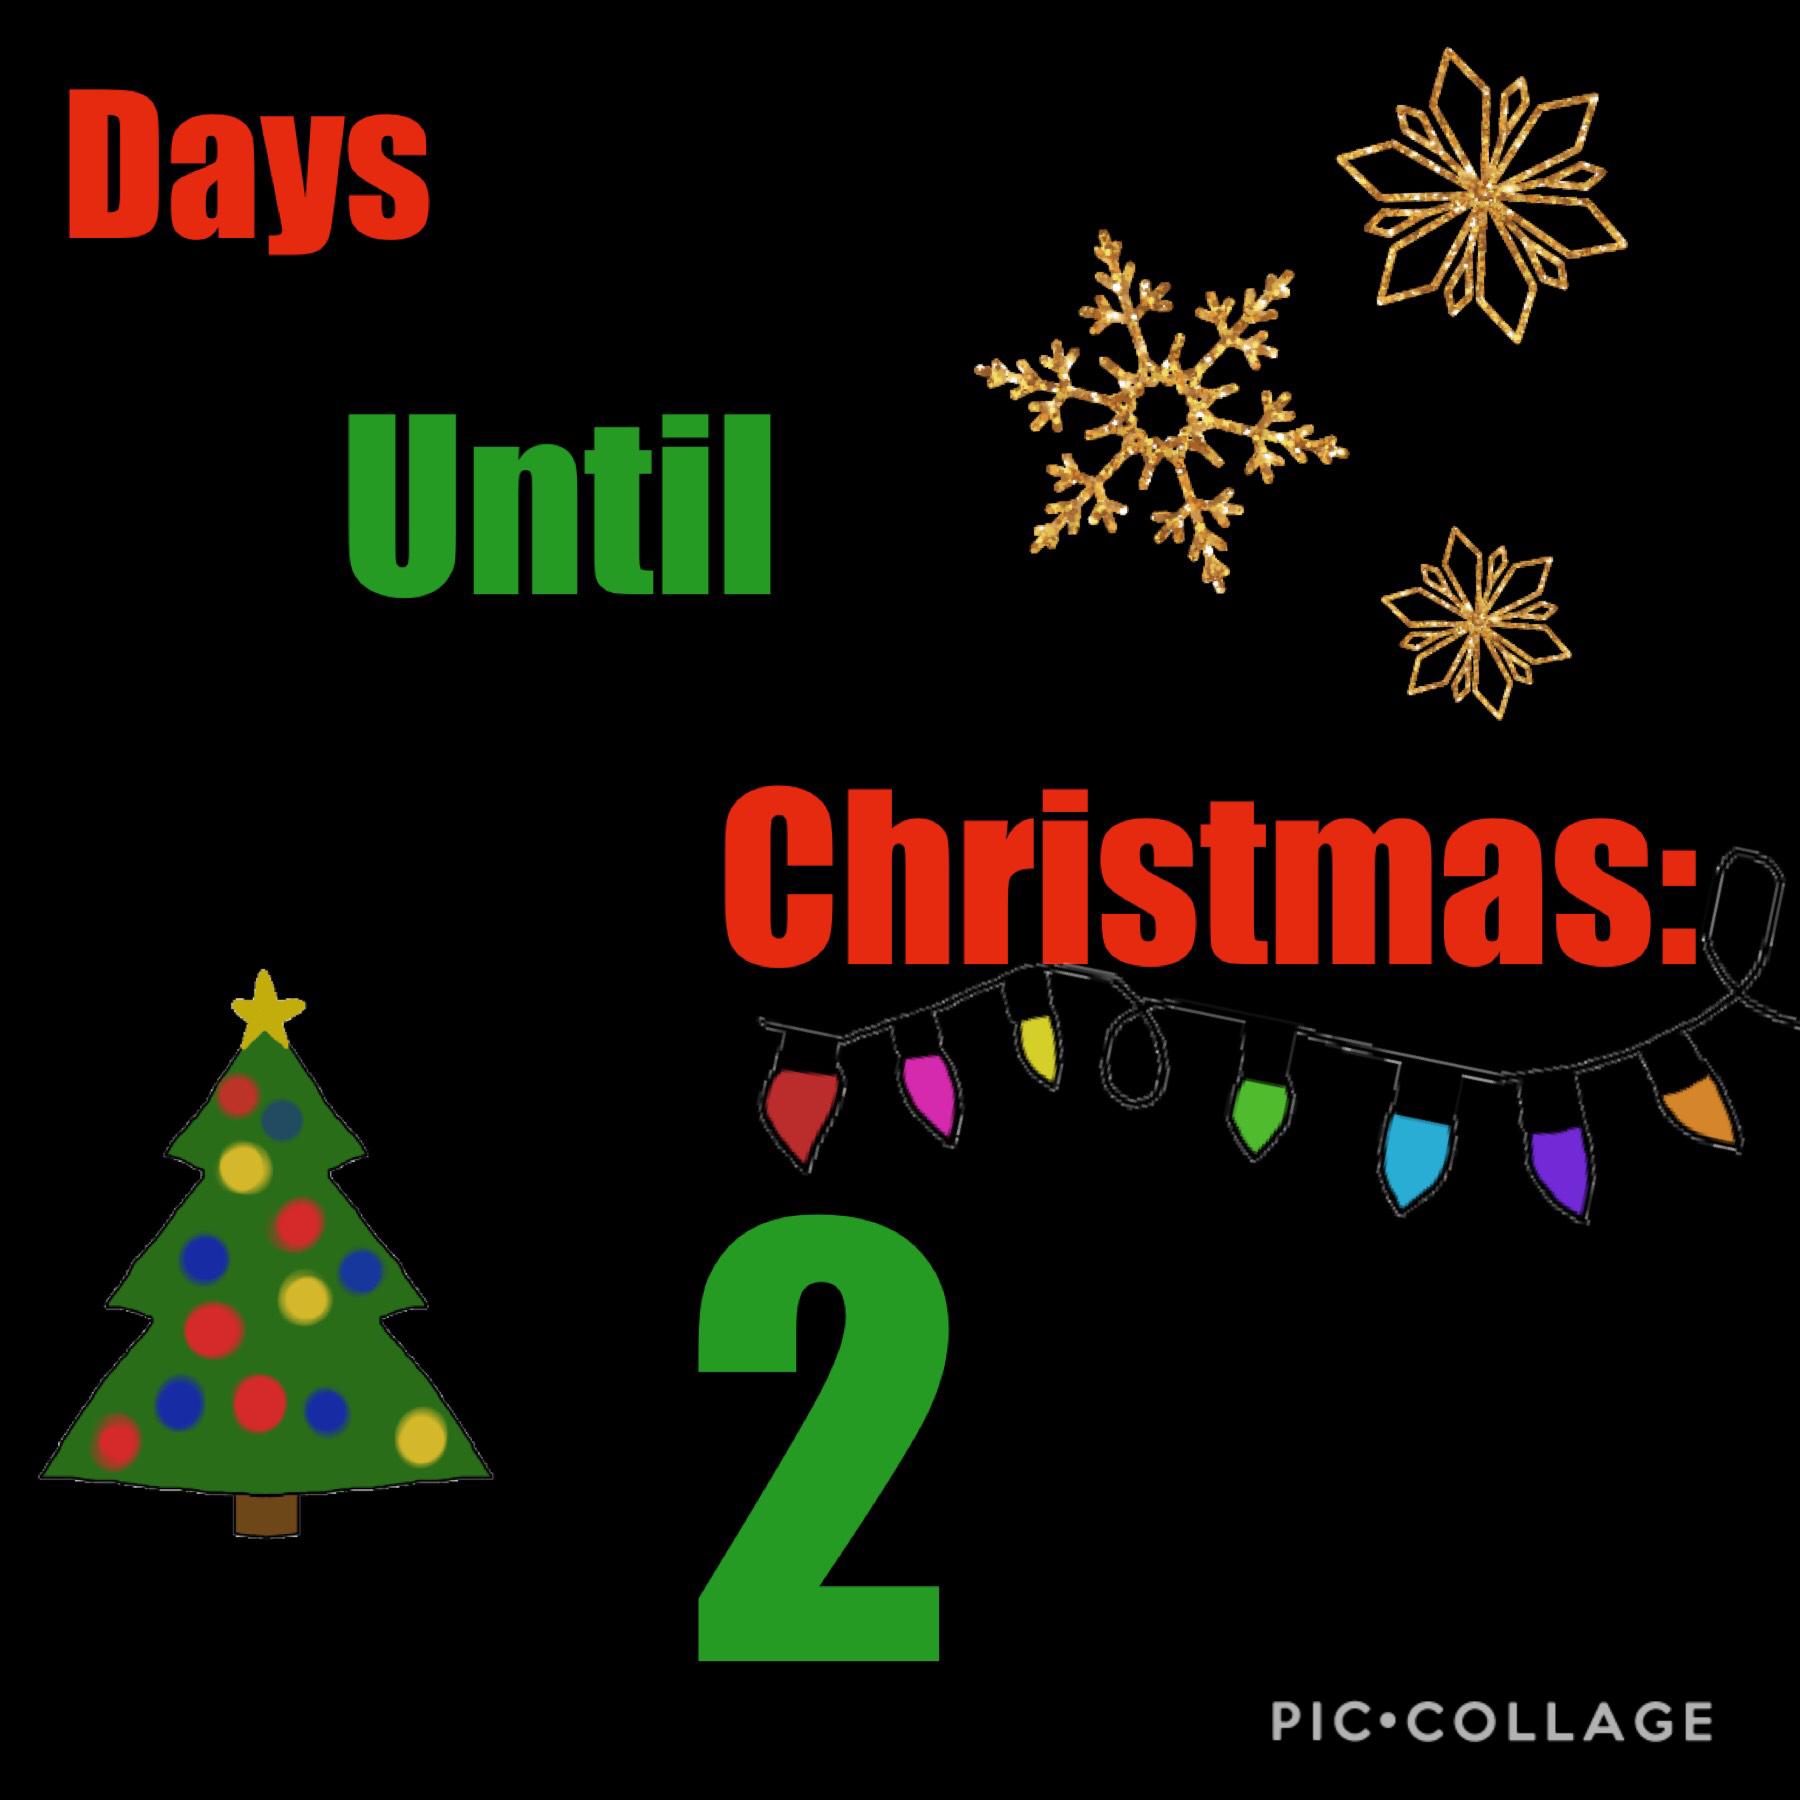 ONLY 2 MORE DAYS TILL CHRISTMAS!!!
